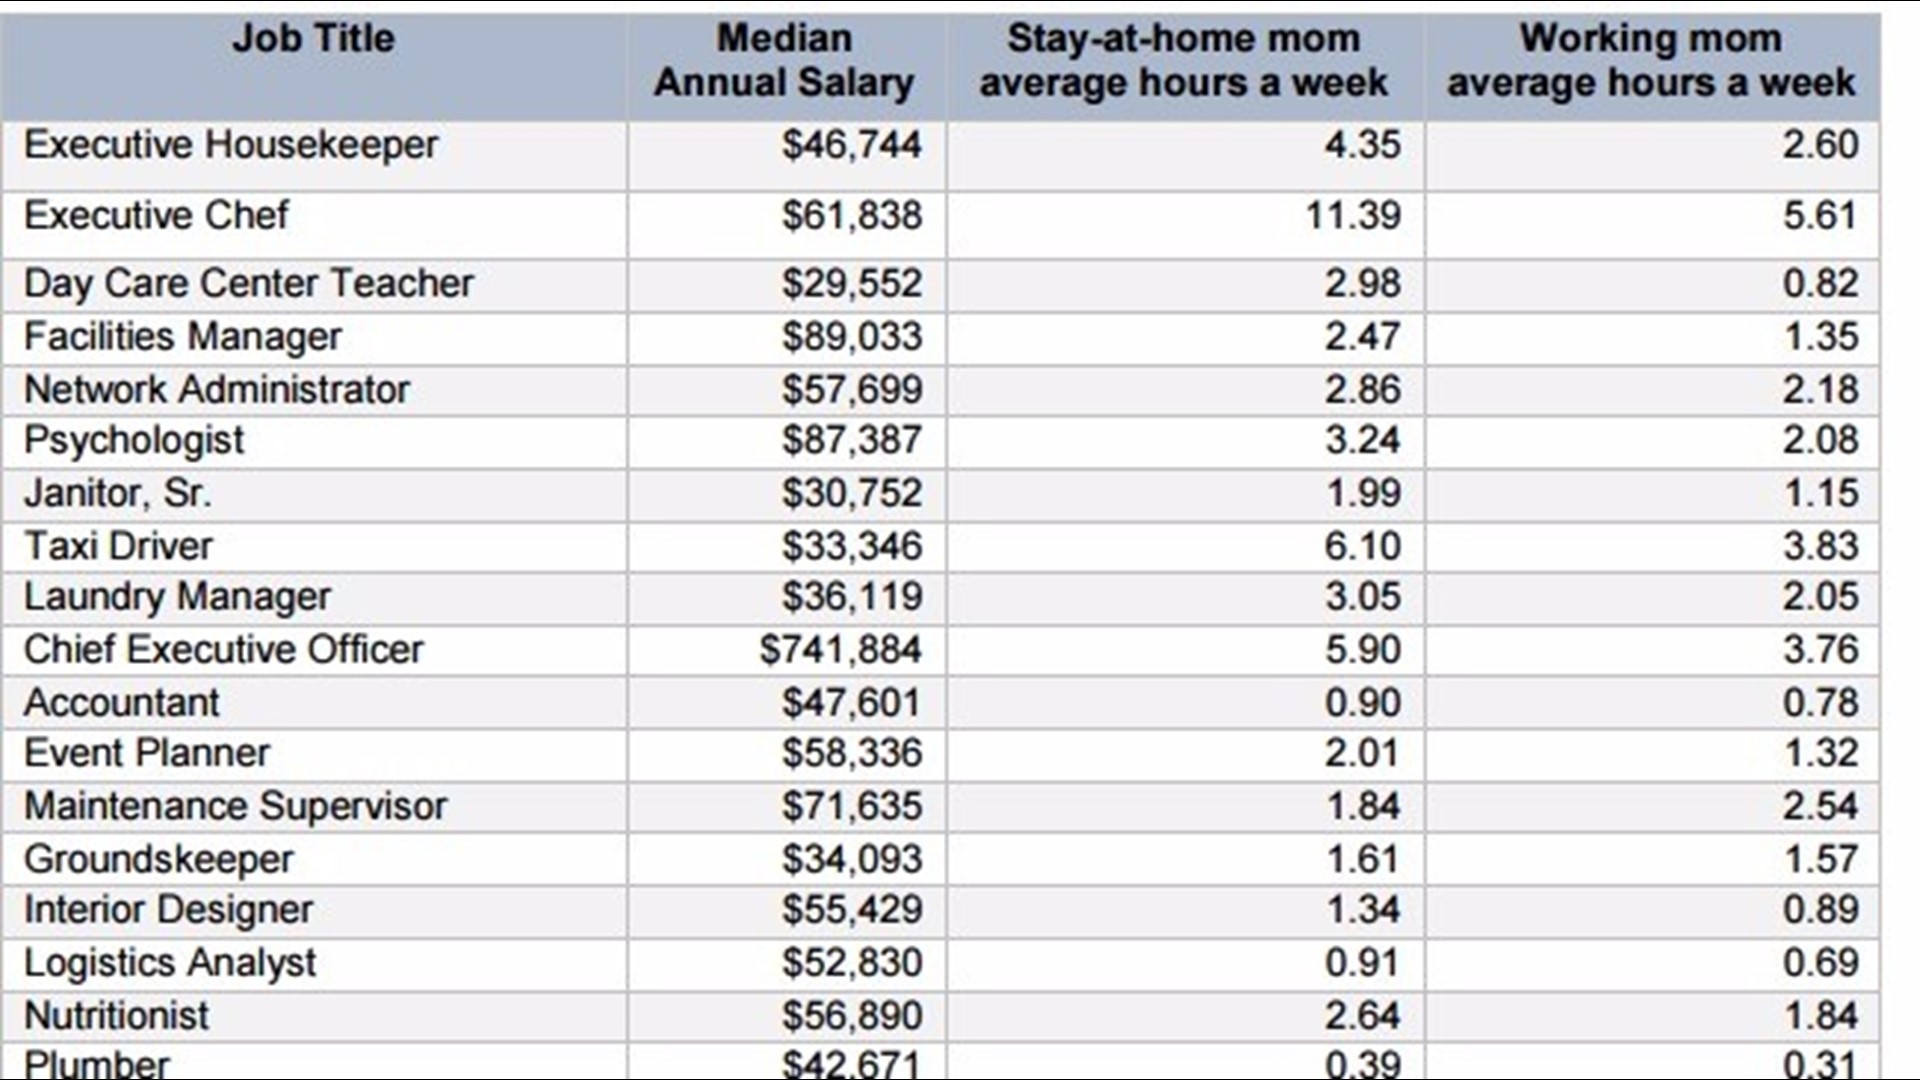 How much is a stayathome mom worth?